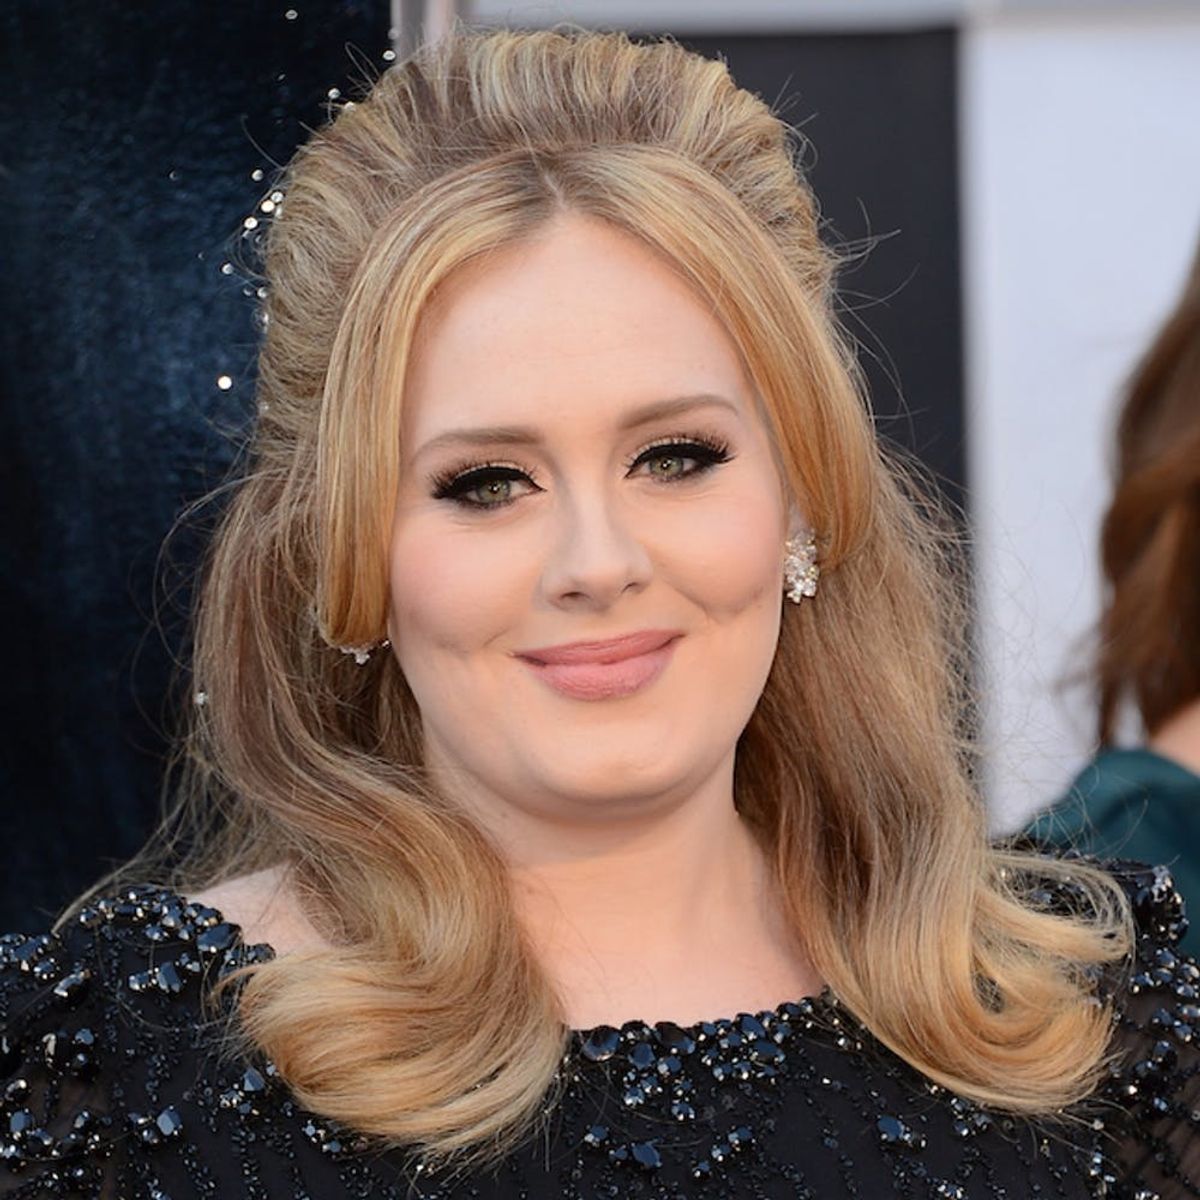 Adele’s Quote About Body Image Will Make Your Day